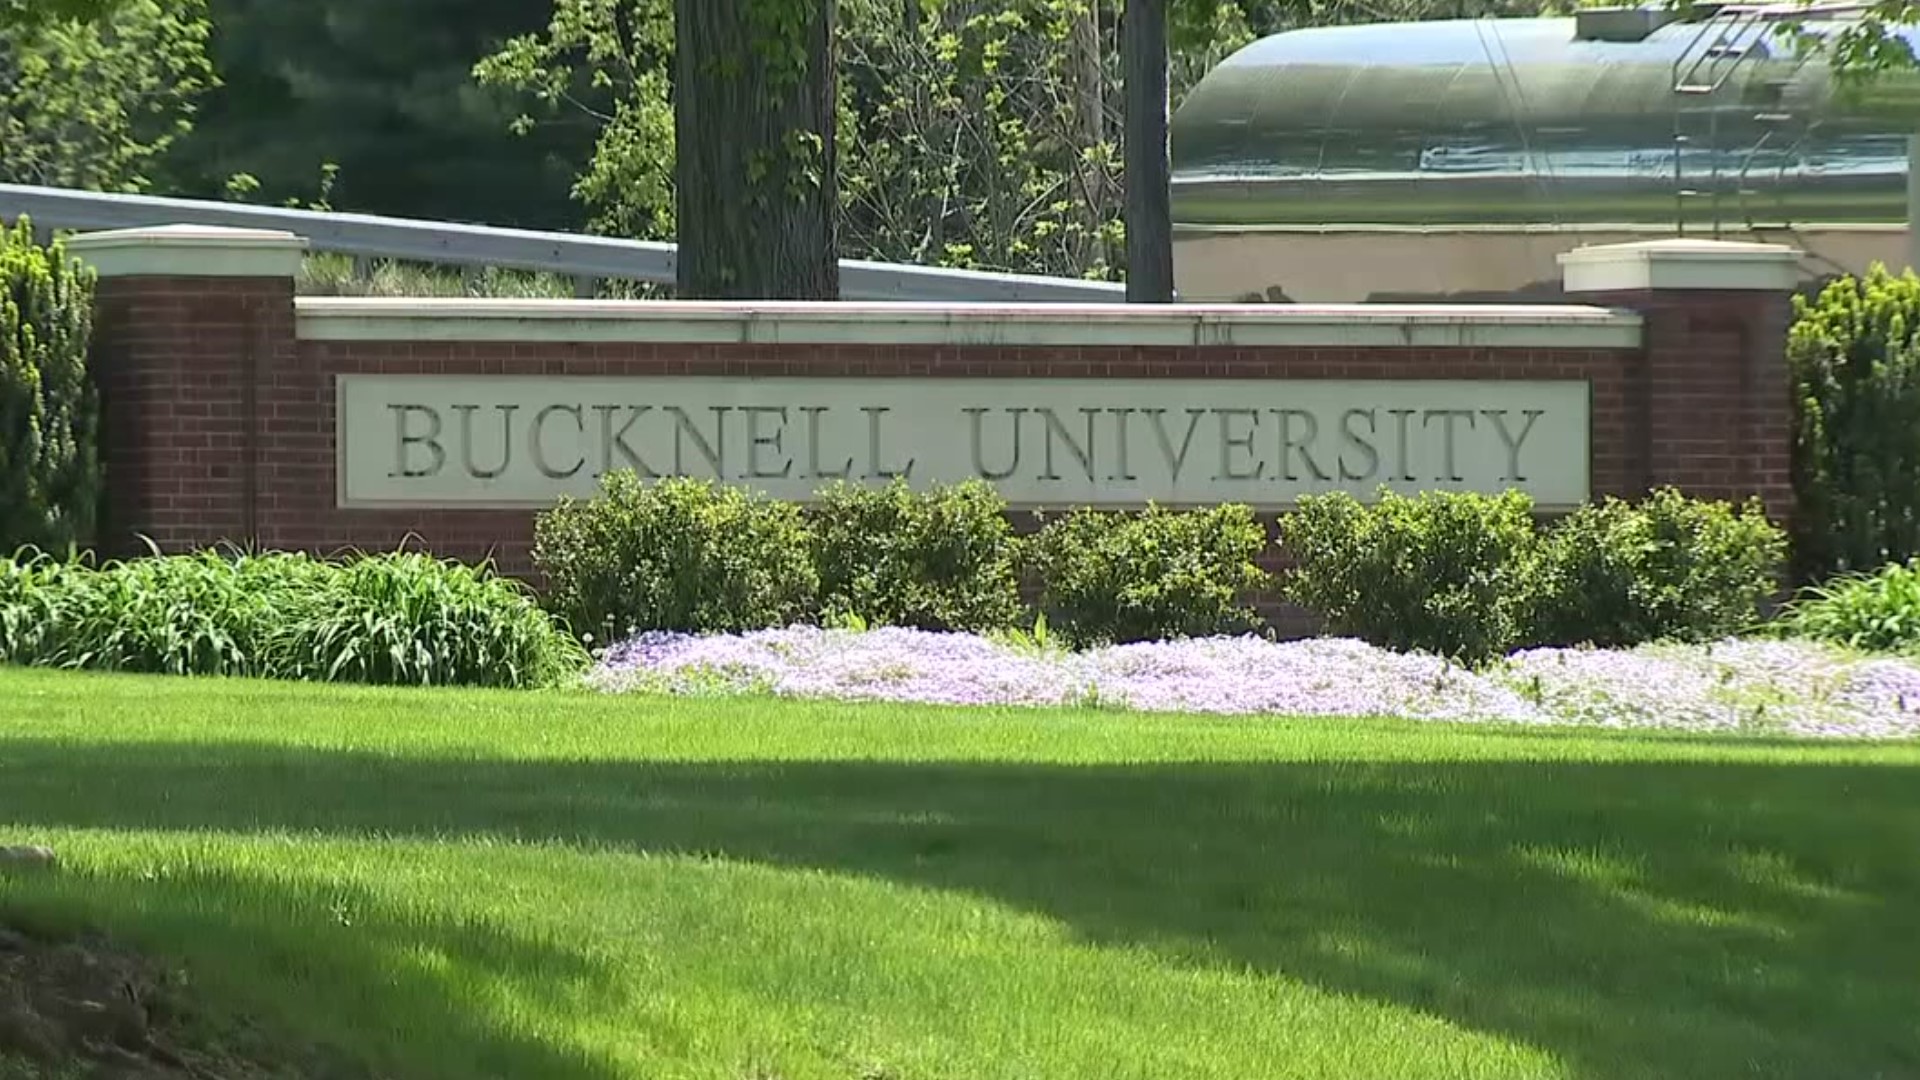 According to Bucknell University officials, the person is isolating off-campus.